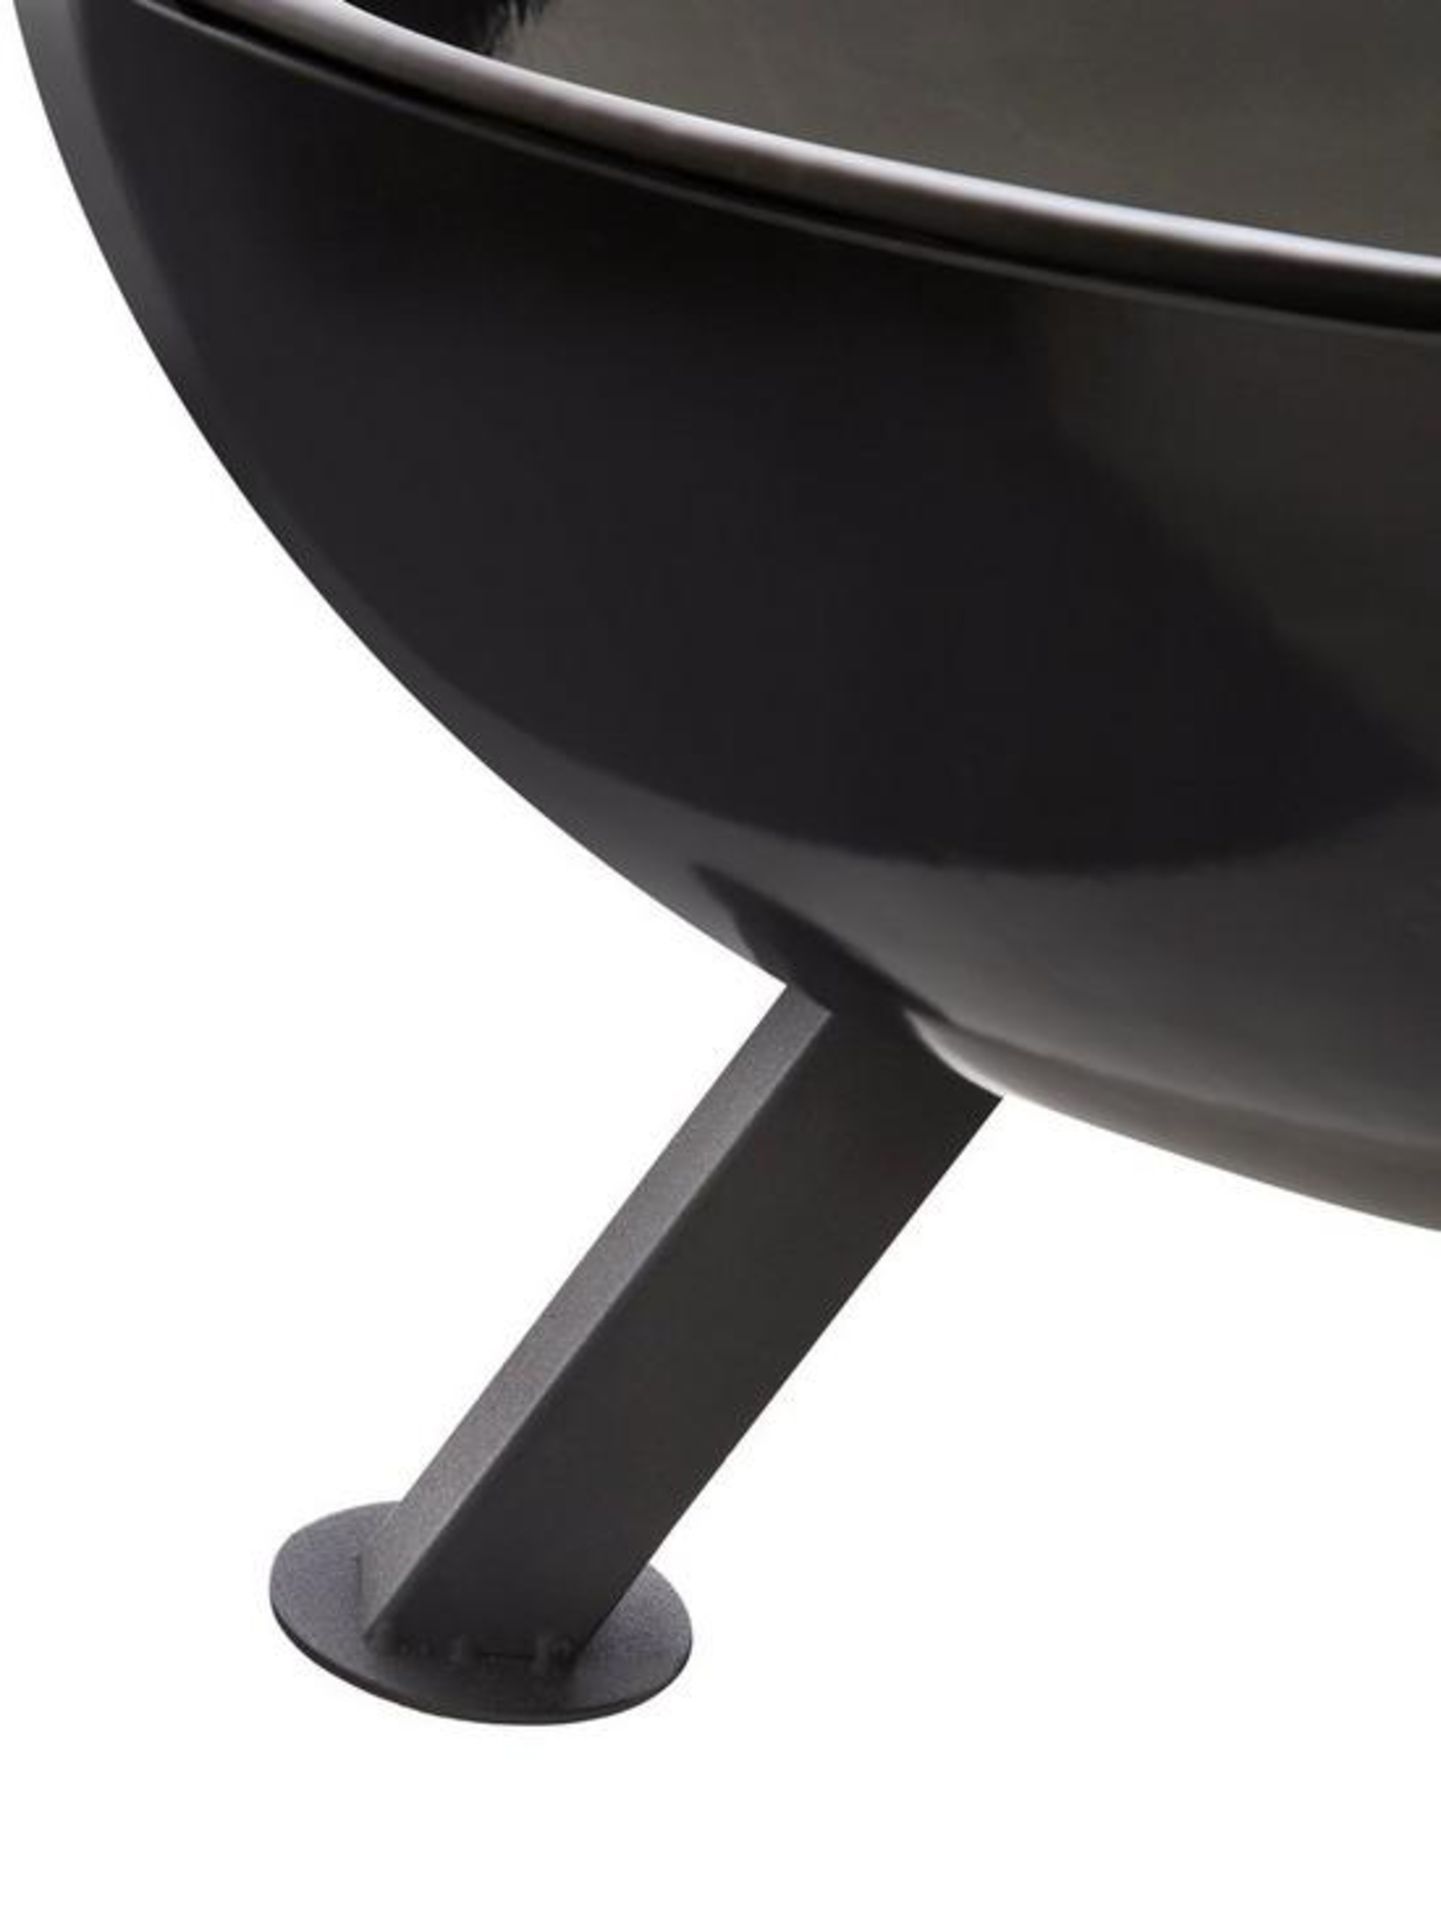 ALAMO FIRE BOWL IN BLACK - RRP £75 - Image 4 of 4